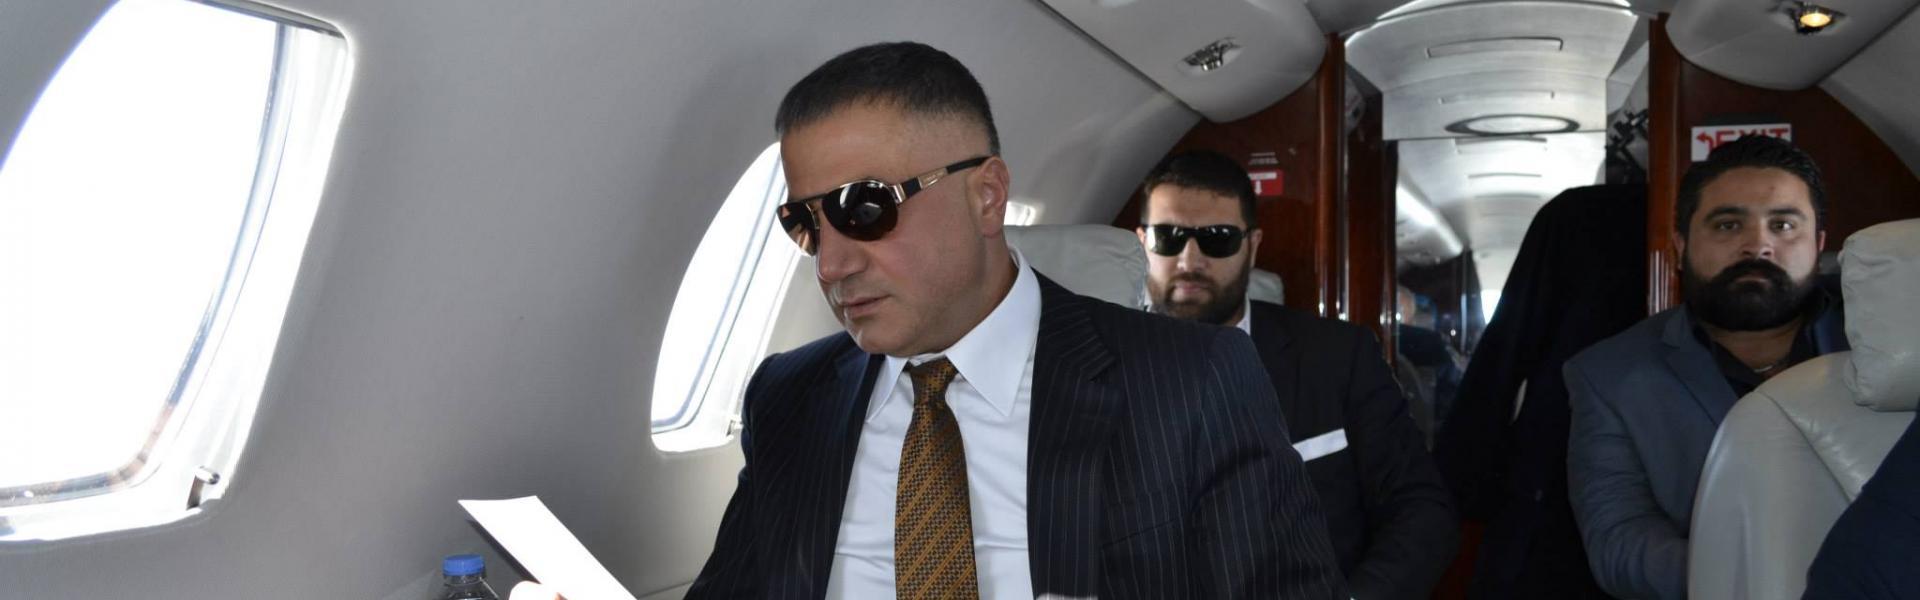 Turkish Mob Boss Among 63 Organized Crime Suspects Targeted In Police Operation News About 